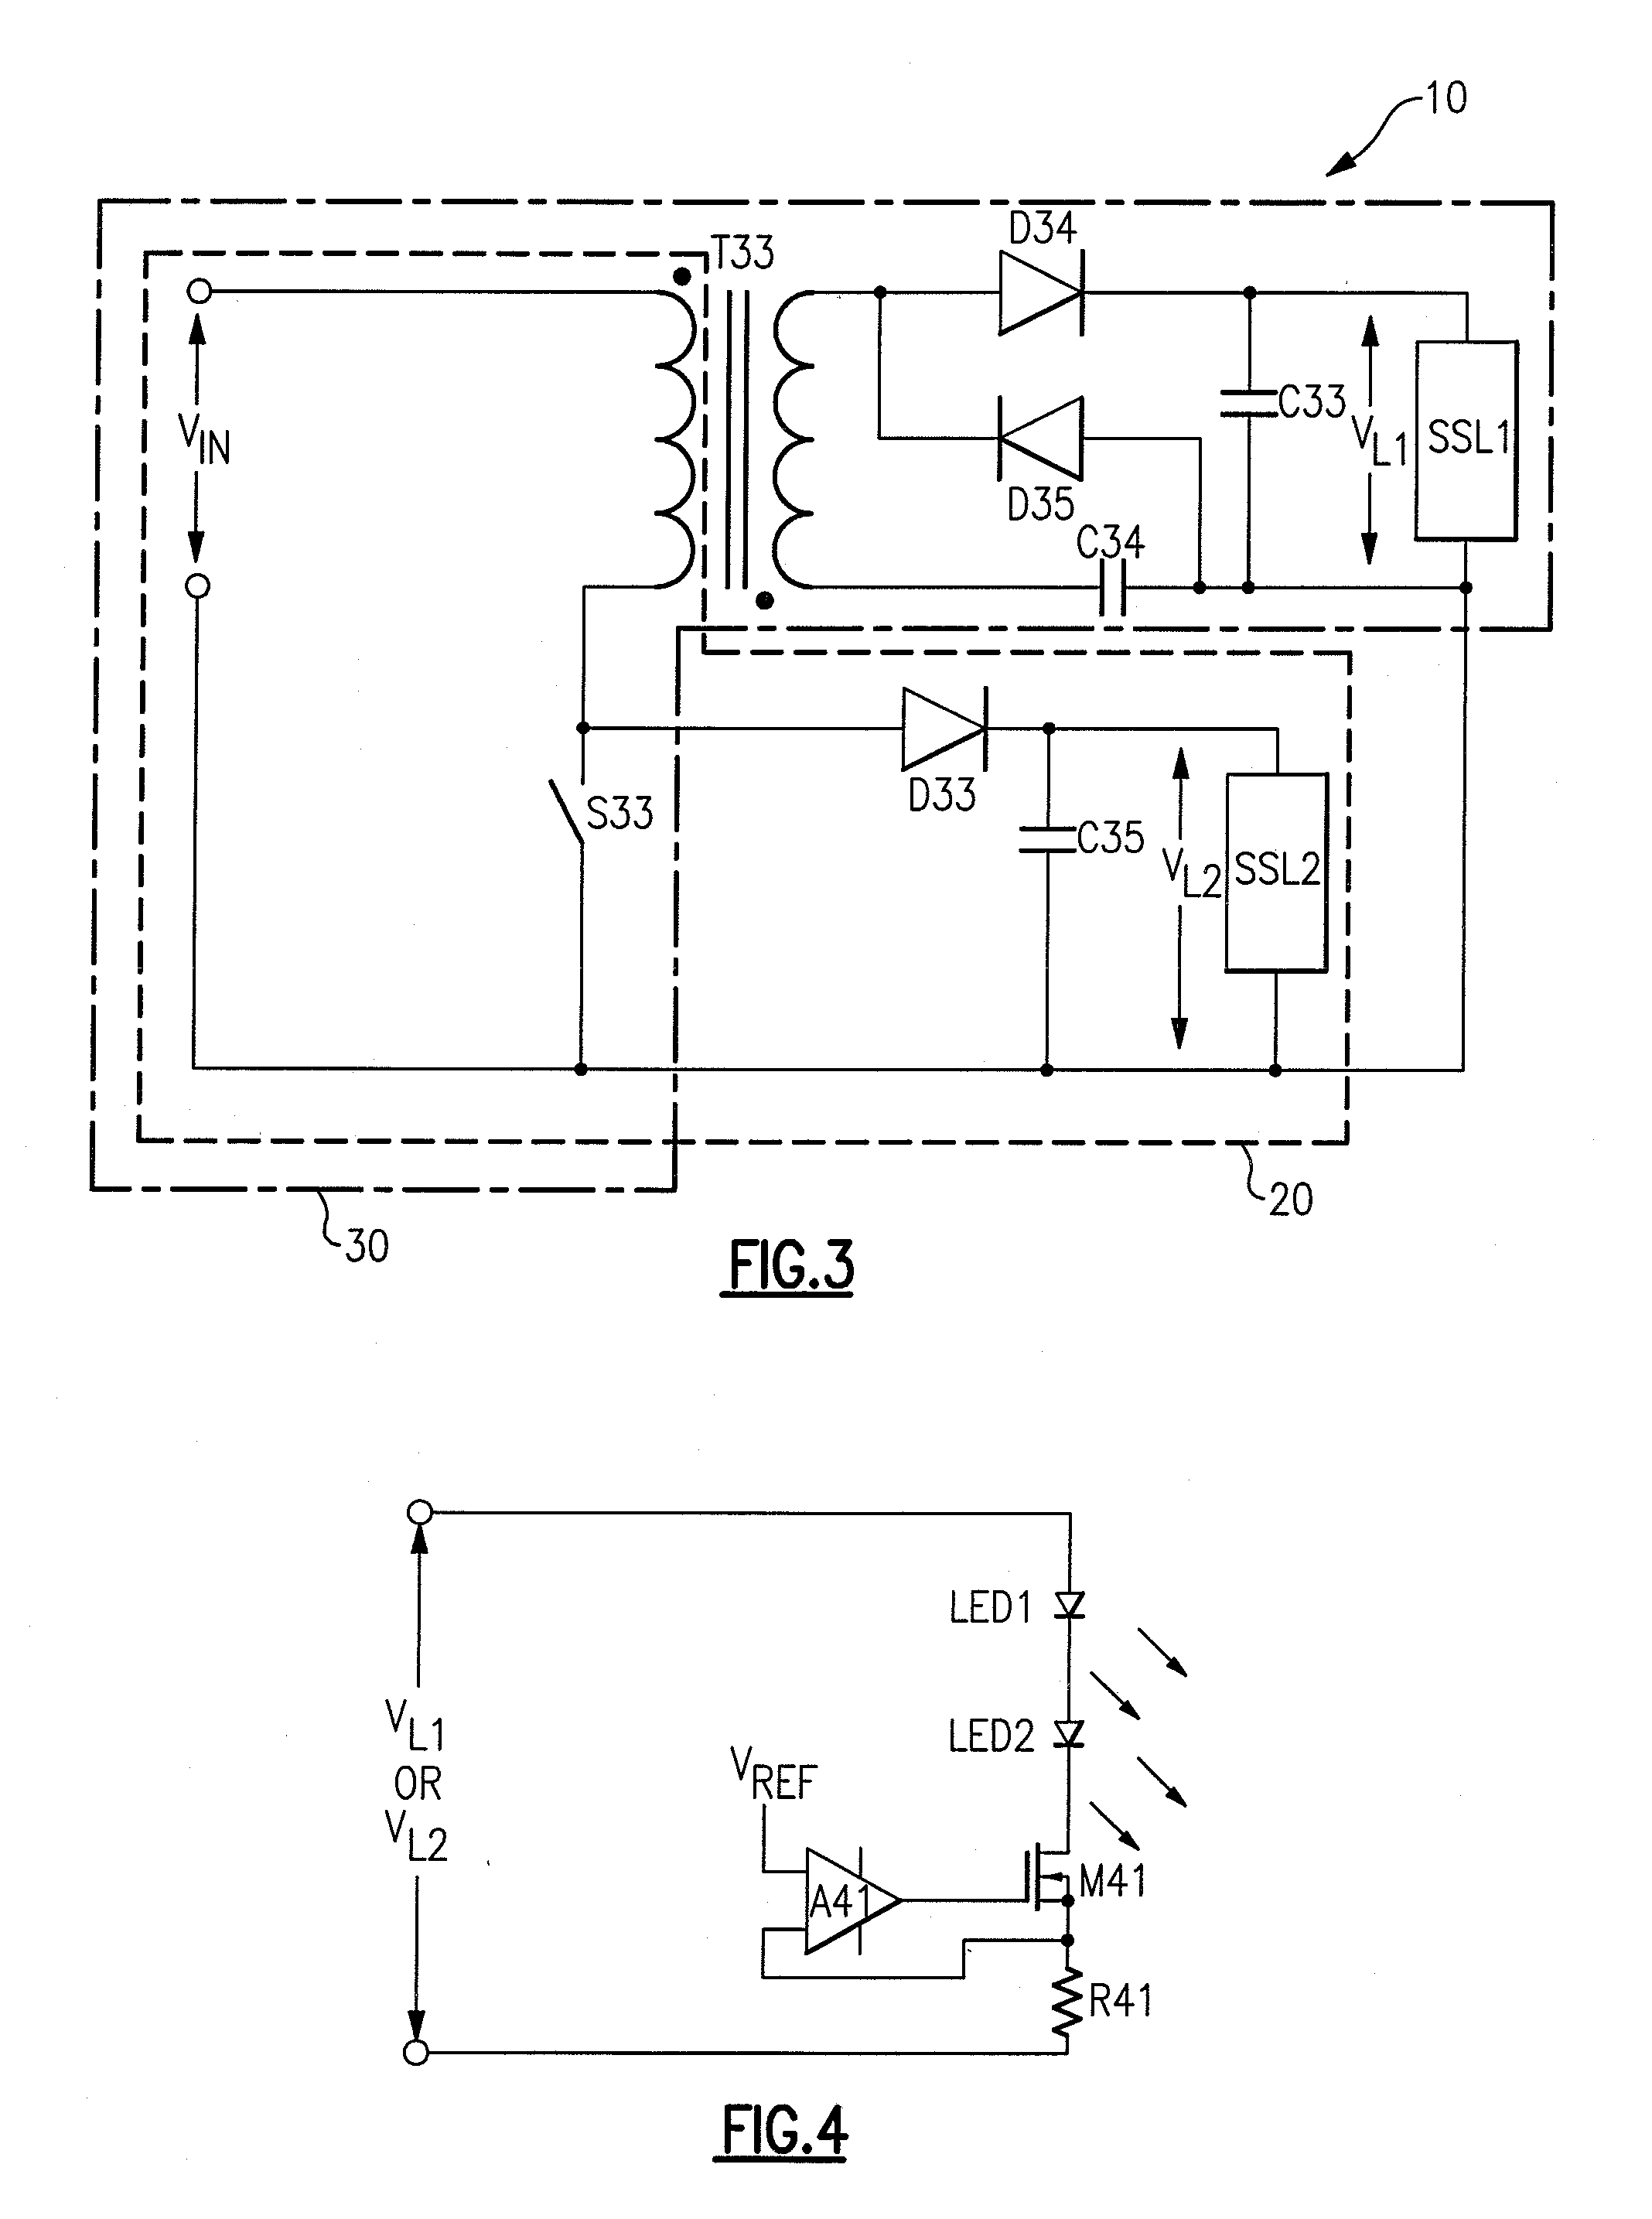 Circuitry for supplying electrical power to loads